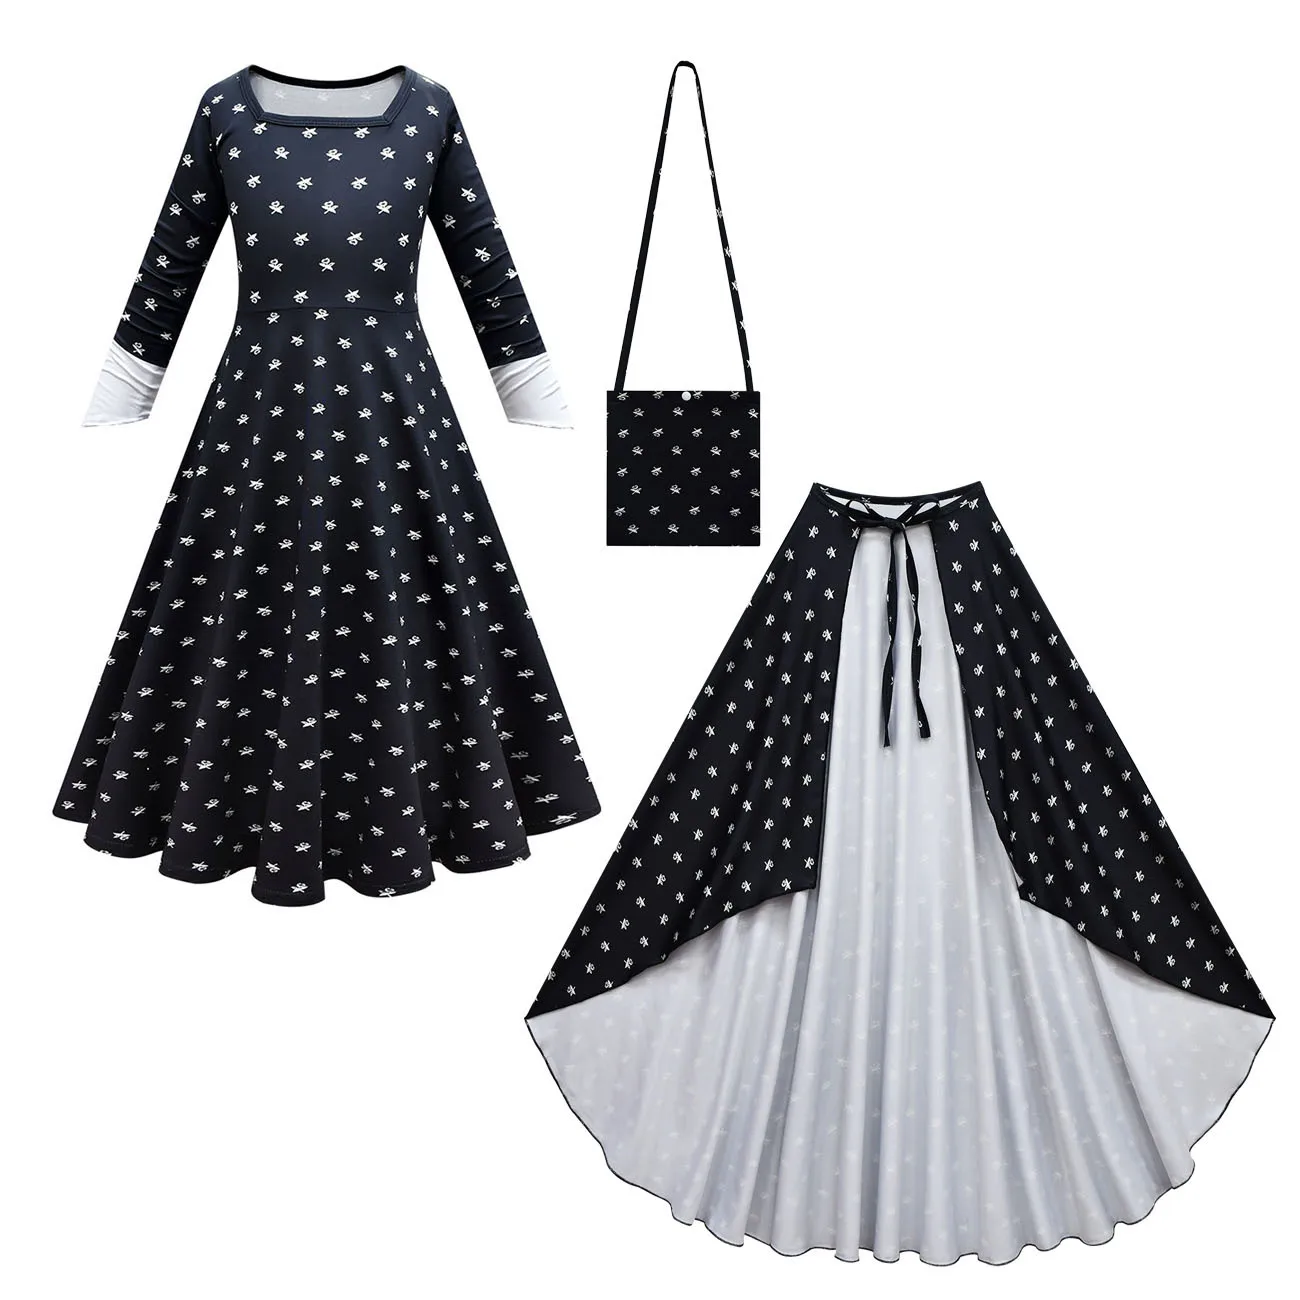 

Little Girls Anime Movie Addams Polka Dot Printing Black Dress Kids Fashion Casual Party Cosplay Costumes Outfit